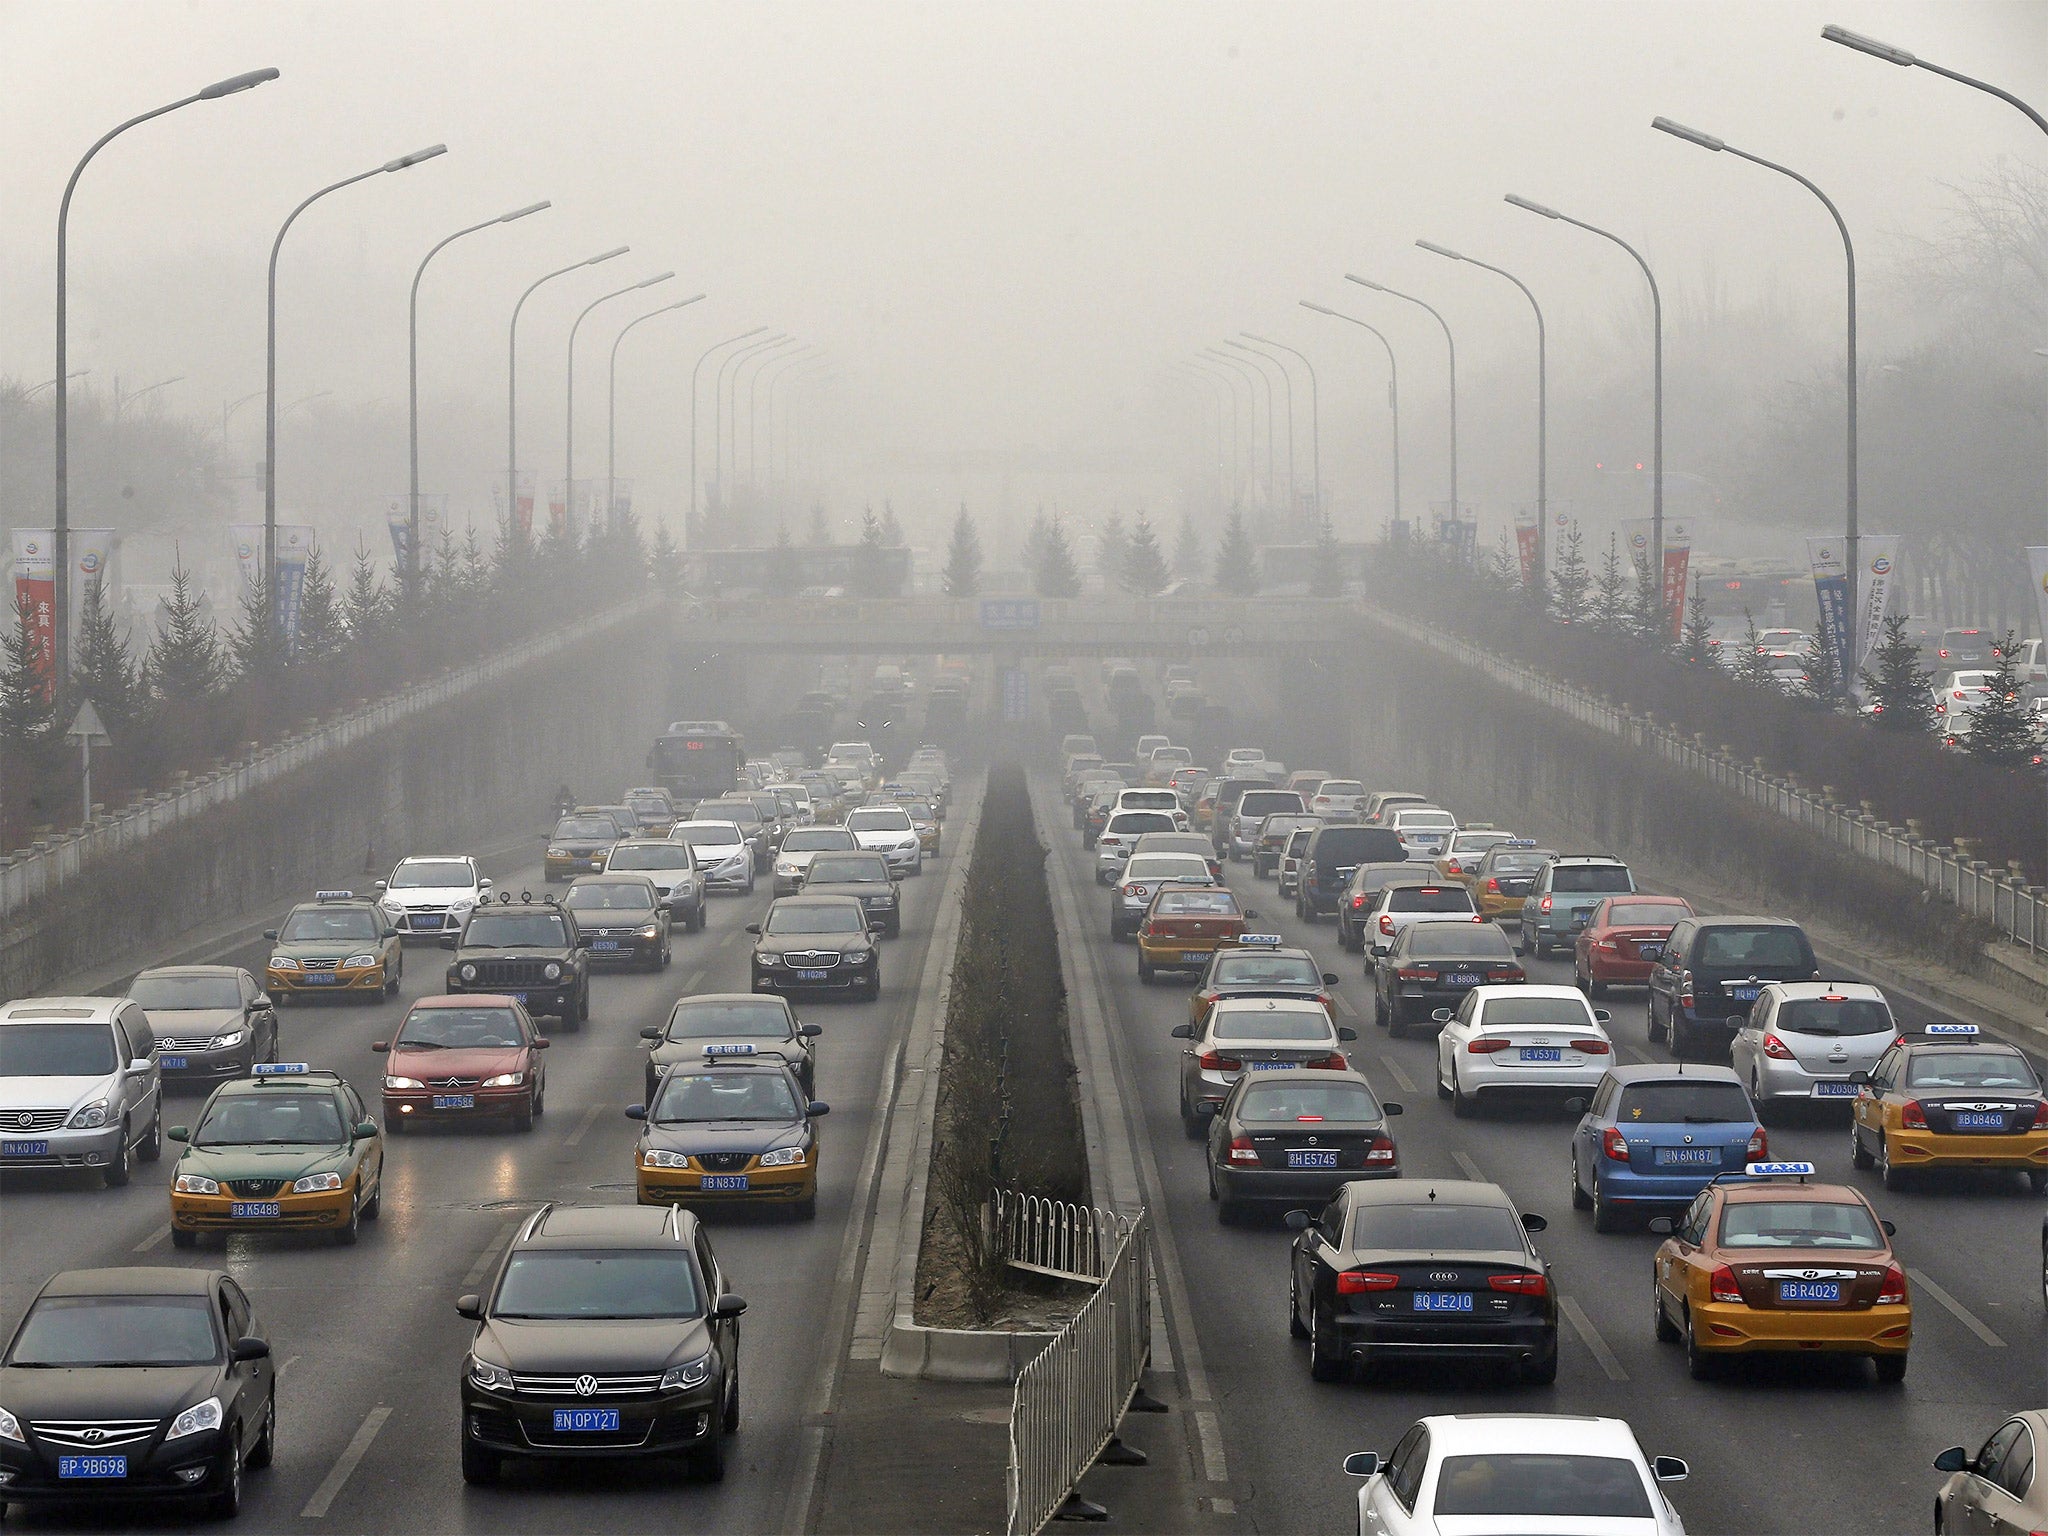 Heavy industry is the main cause of the pollution in Beijing, China